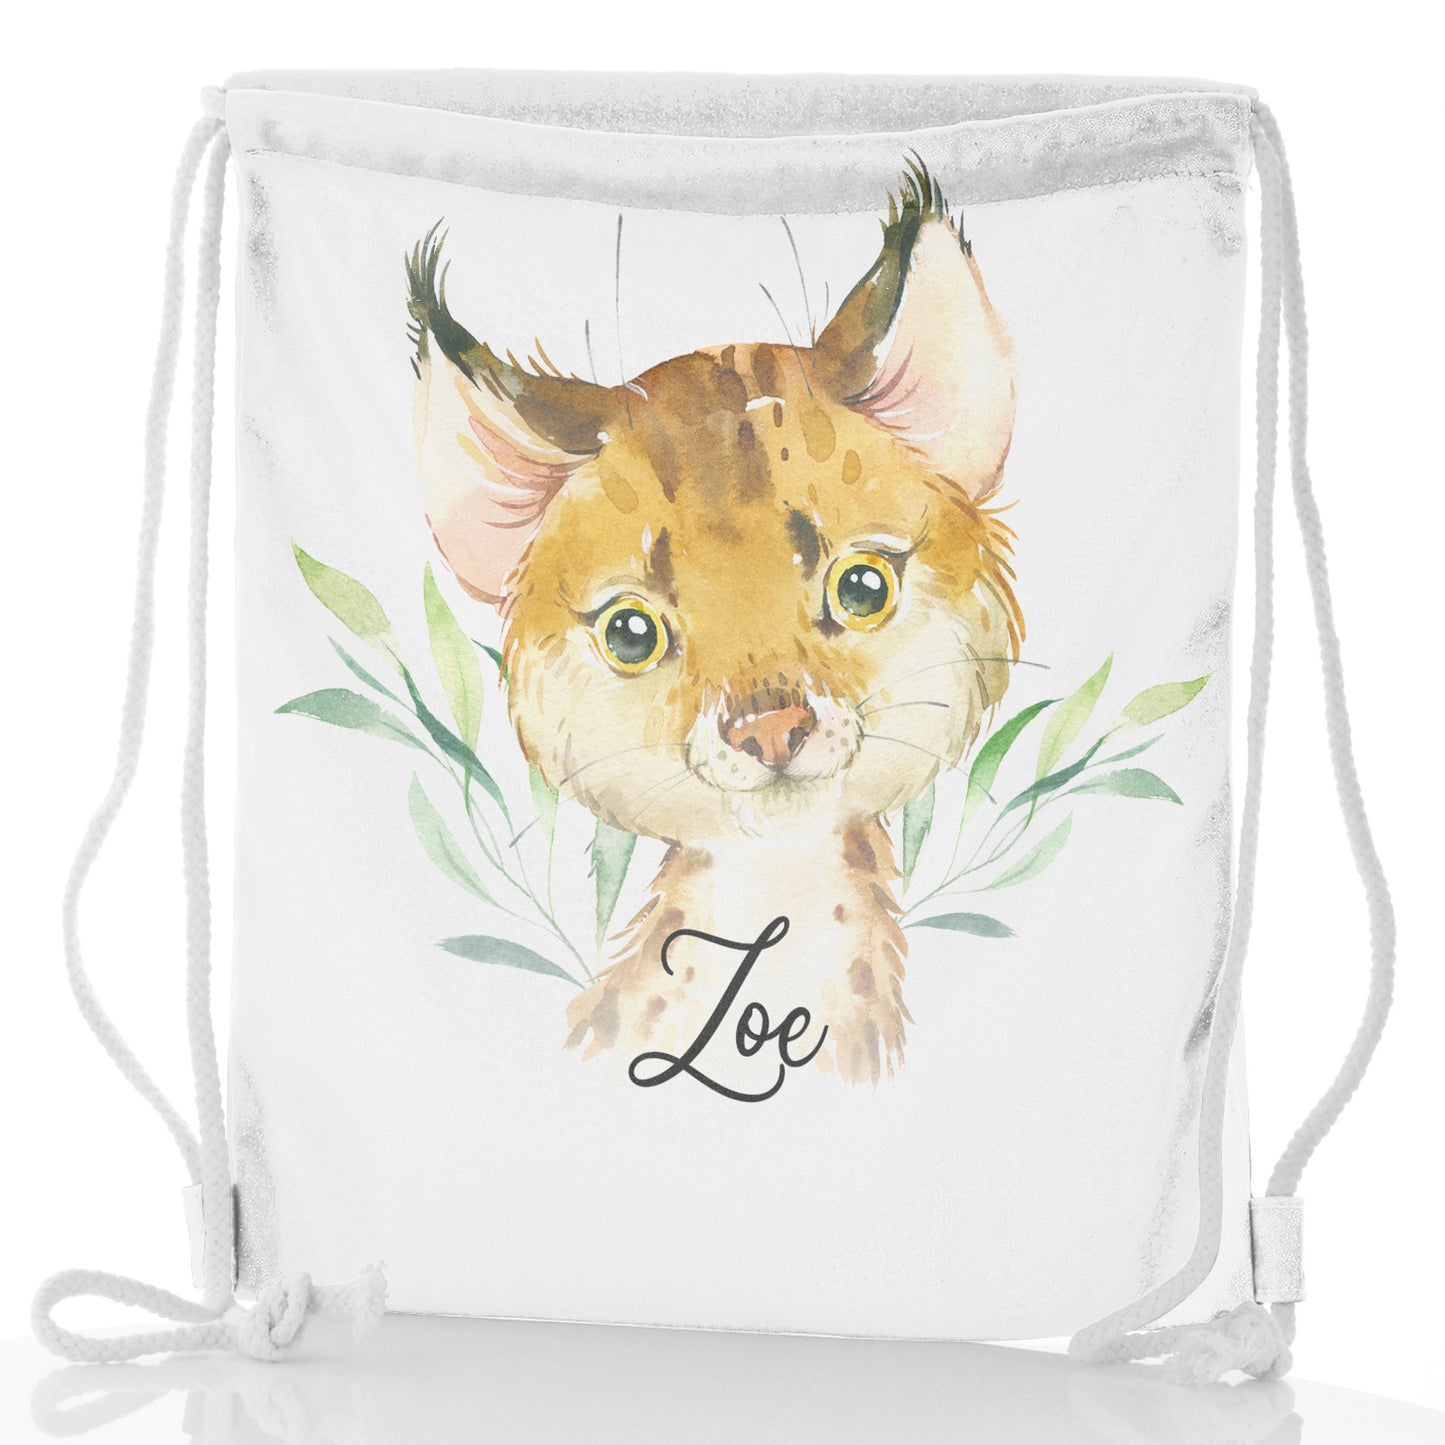 Personalised Glitter Drawstring Backpack with Spot Cat and Leaves and Cute Text